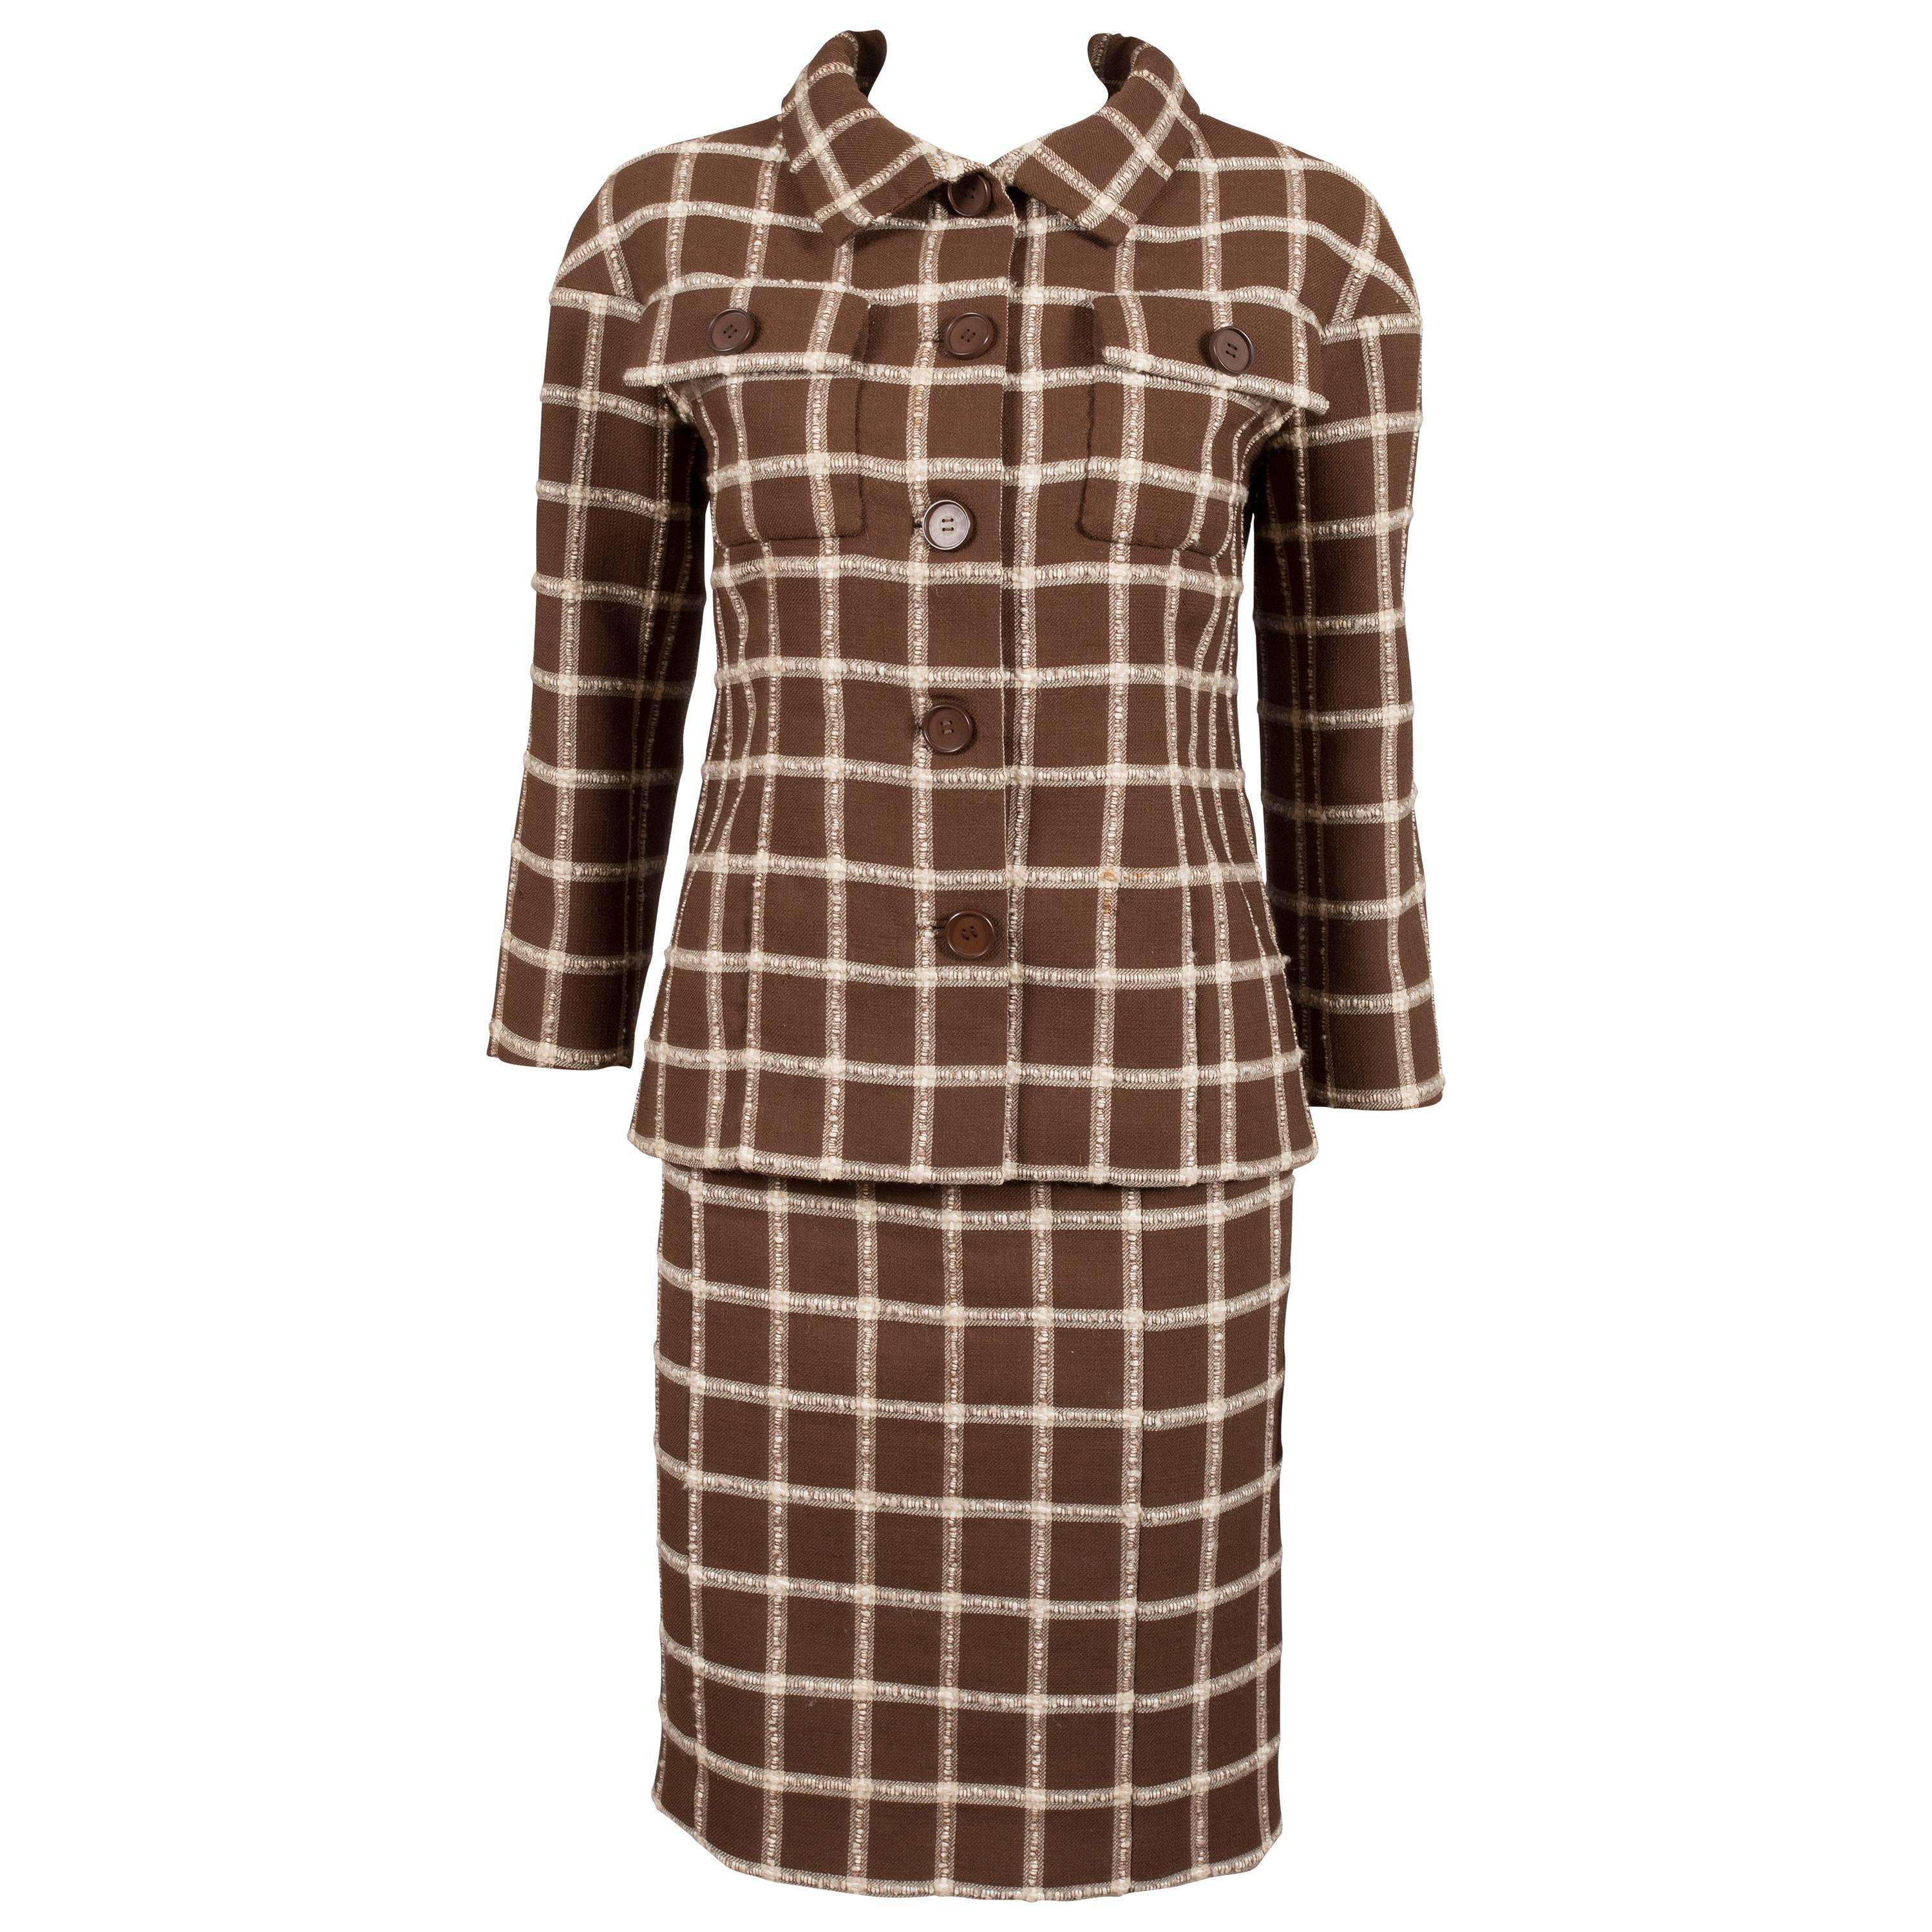 Balenciaga Eisa couture flecked brown and cream checked tweed suit, C. 1965